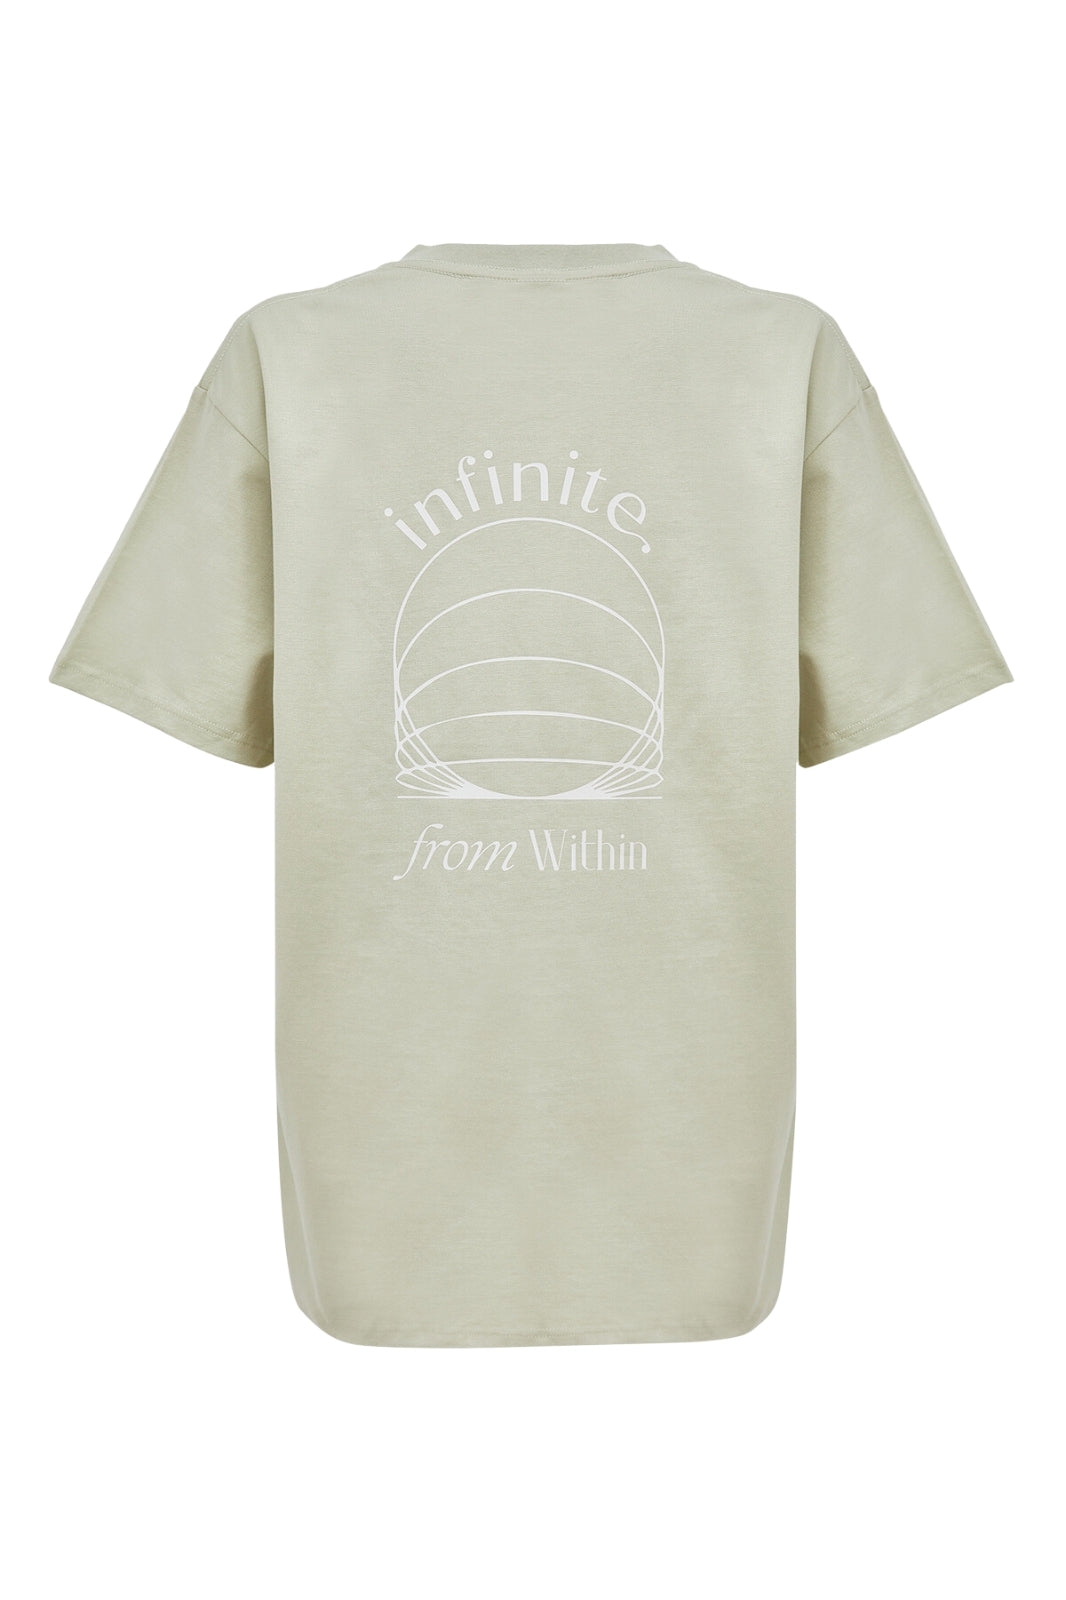 Infinite From Within T-shirt in Matcha (Unisex)